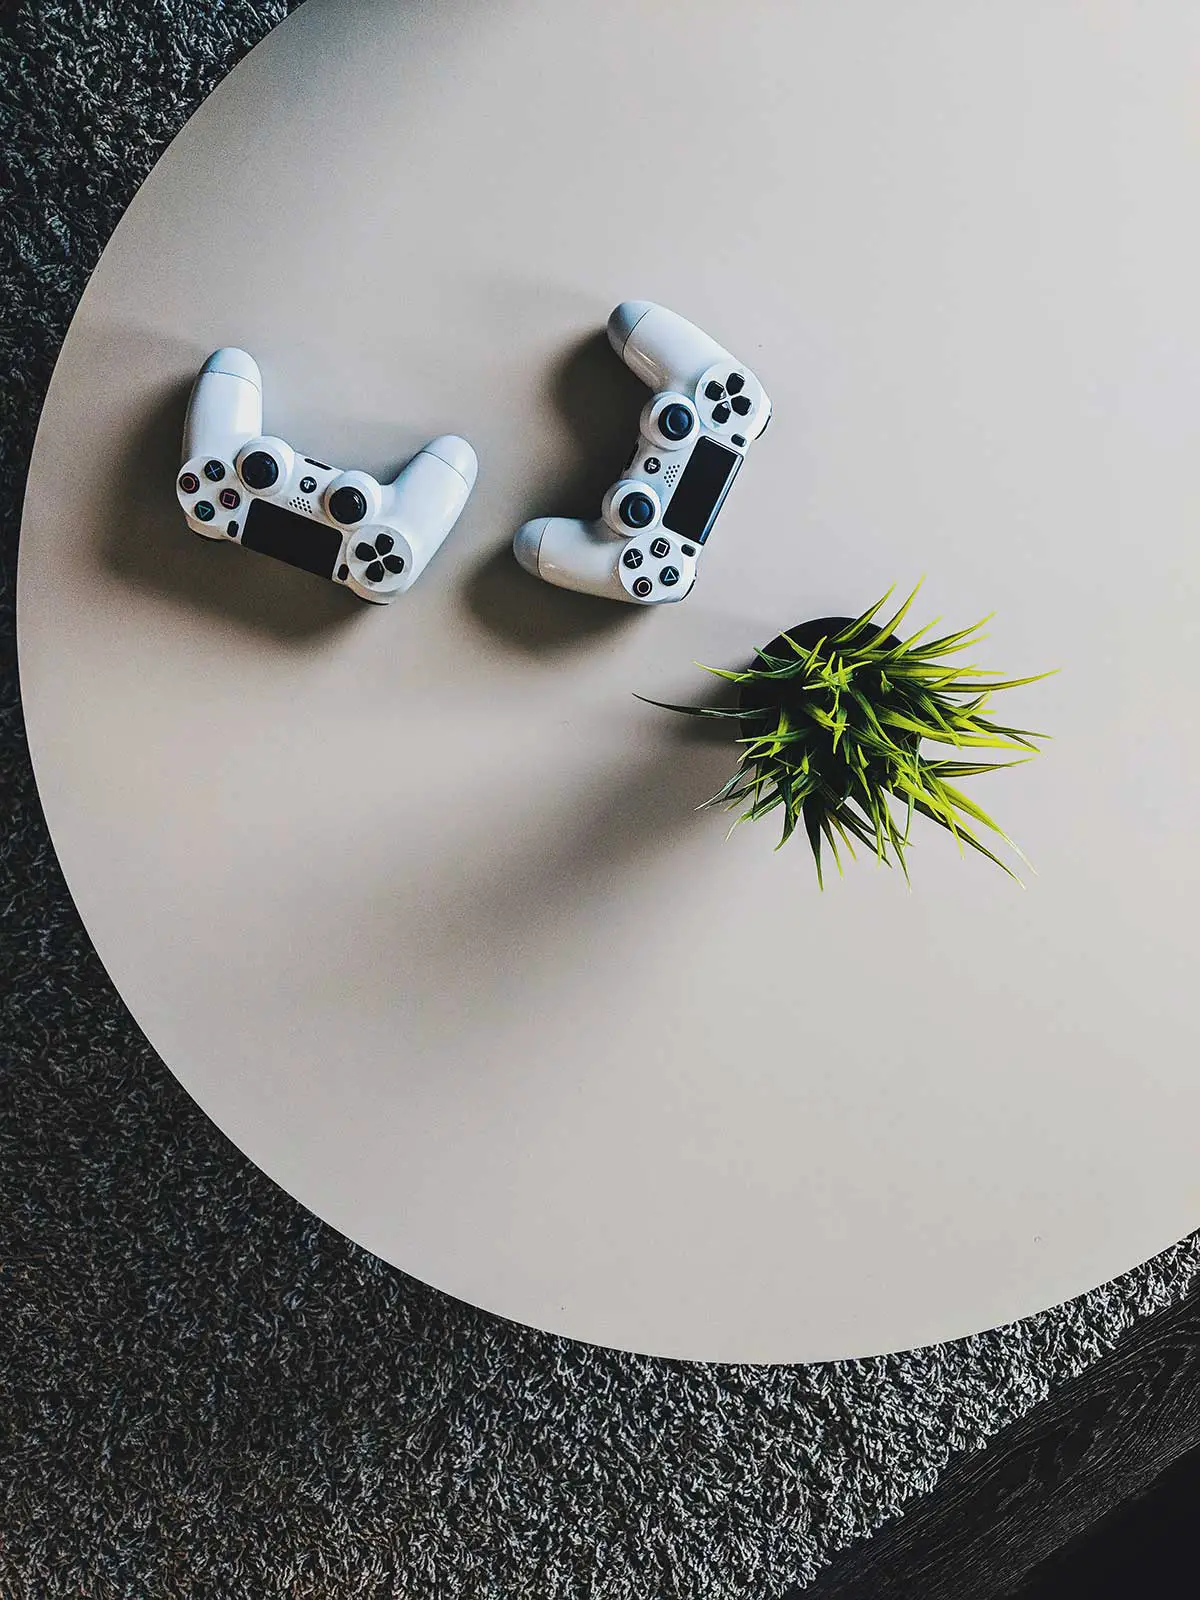 Two playstation controllers on a desk with a plant to show lockdown Date Ideas For Gamers.